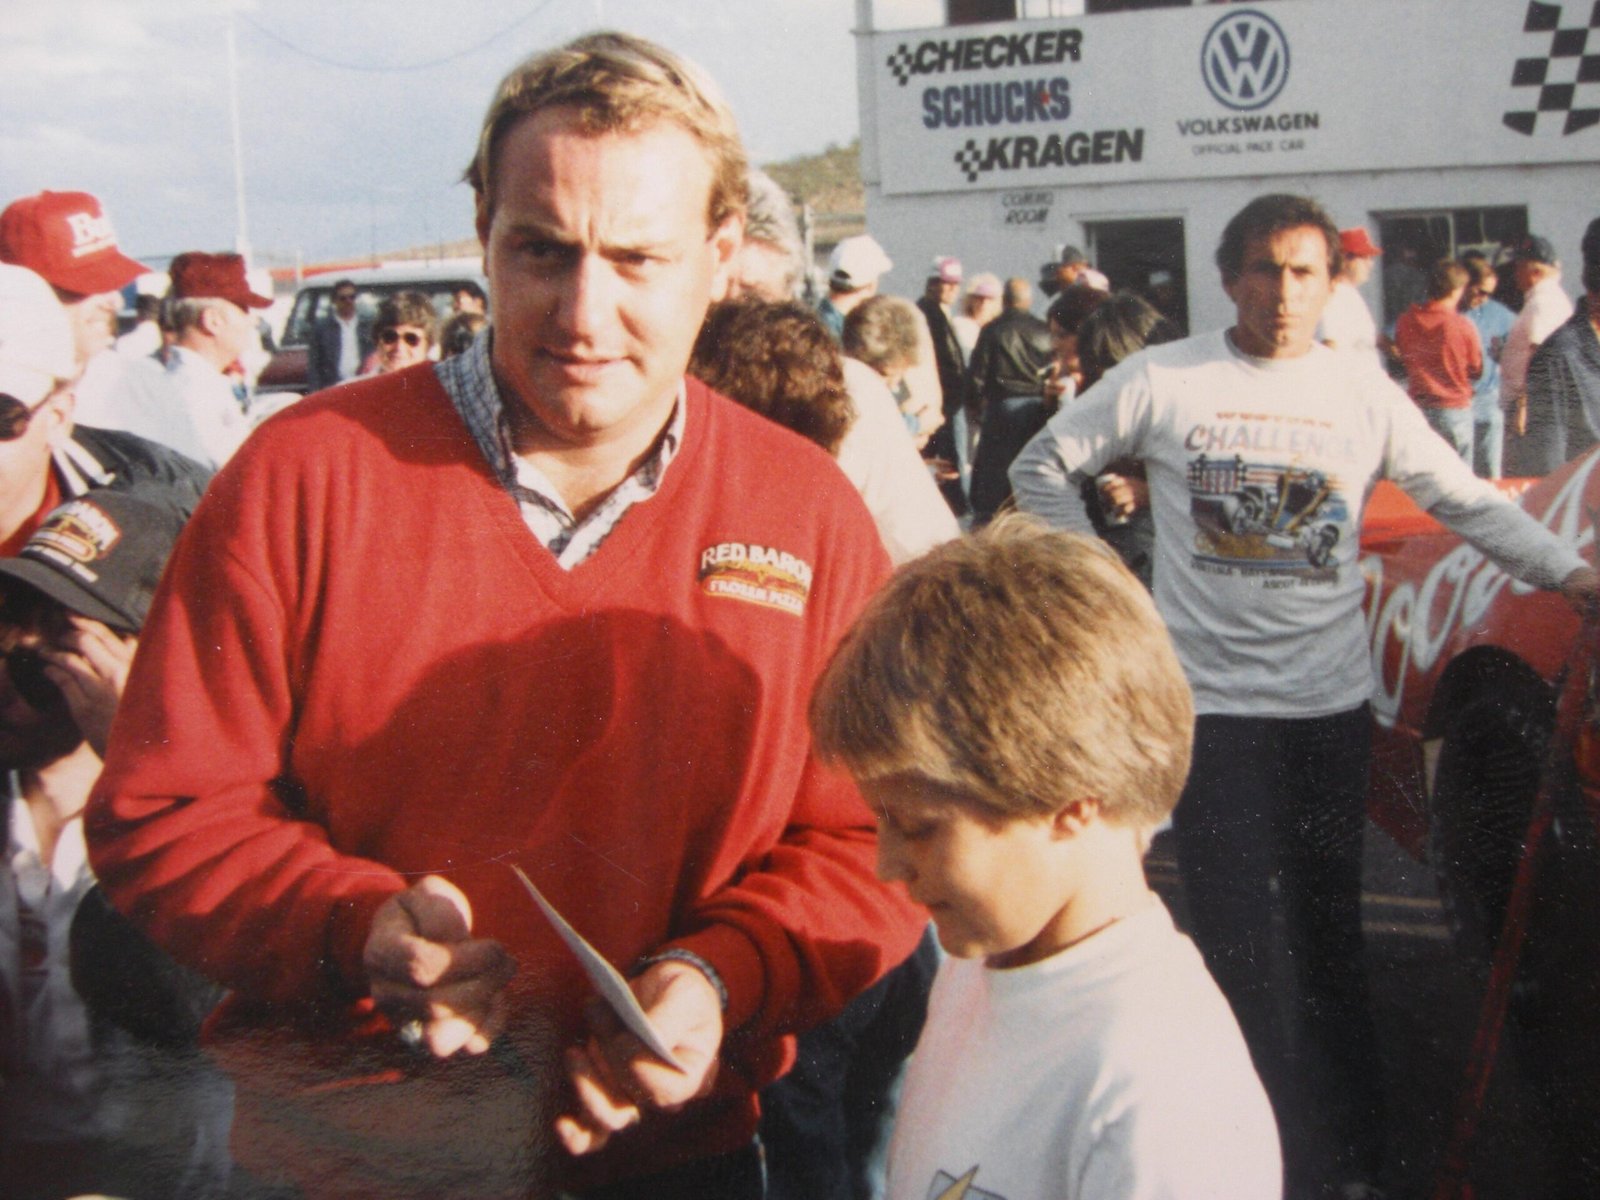 Young J. J. Yeley Taking Autograph And His Father Cactus Jacky In the Background